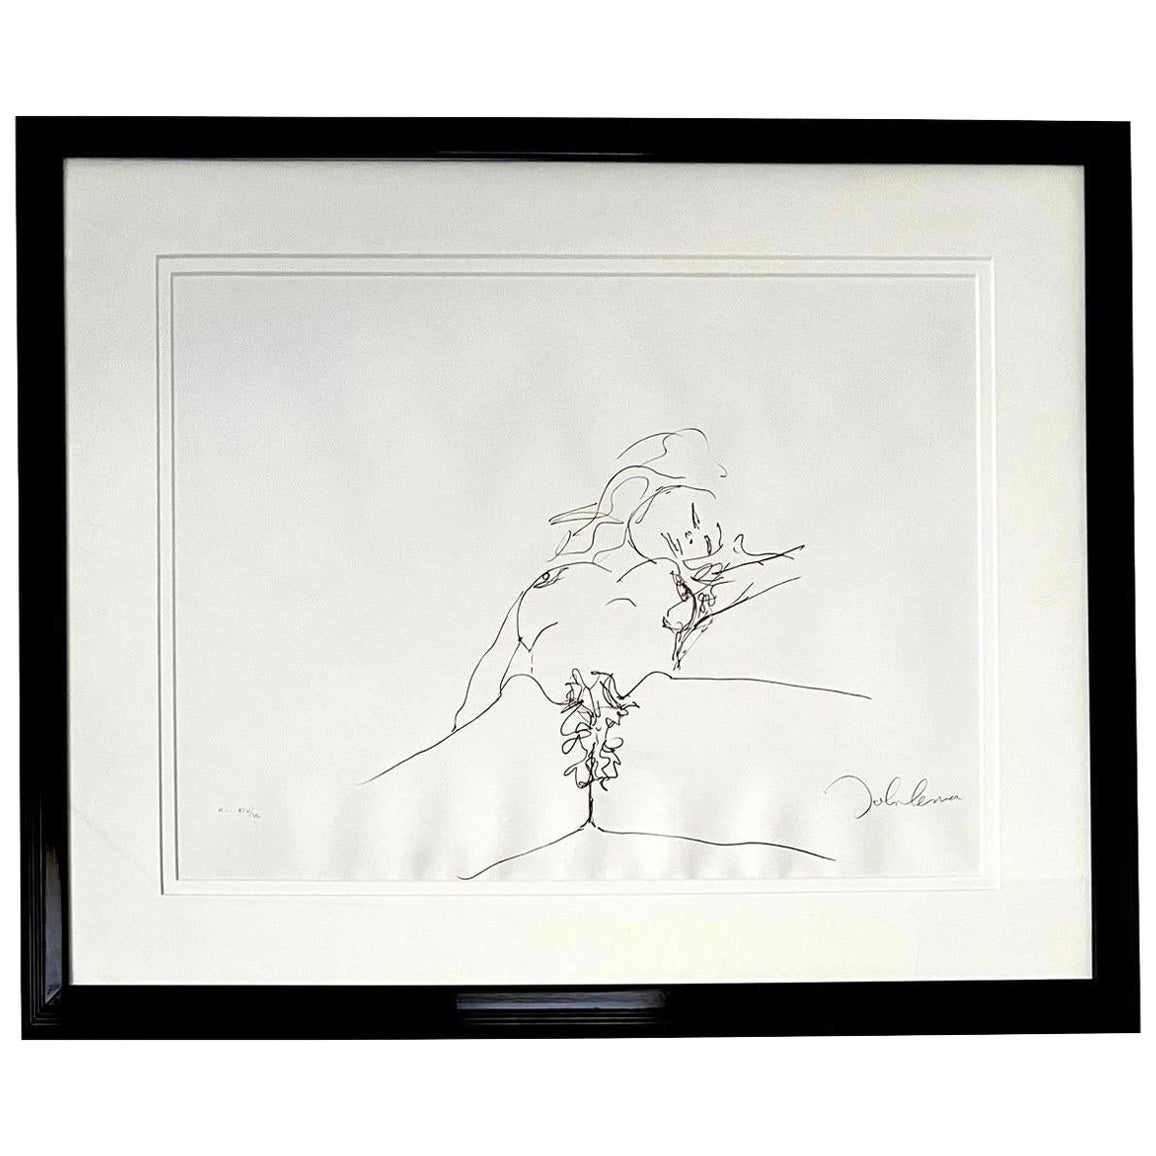 John Lennon Signed Yoko Ono Erotica #2 Bag One Series 1970 Limited Edition For Sale